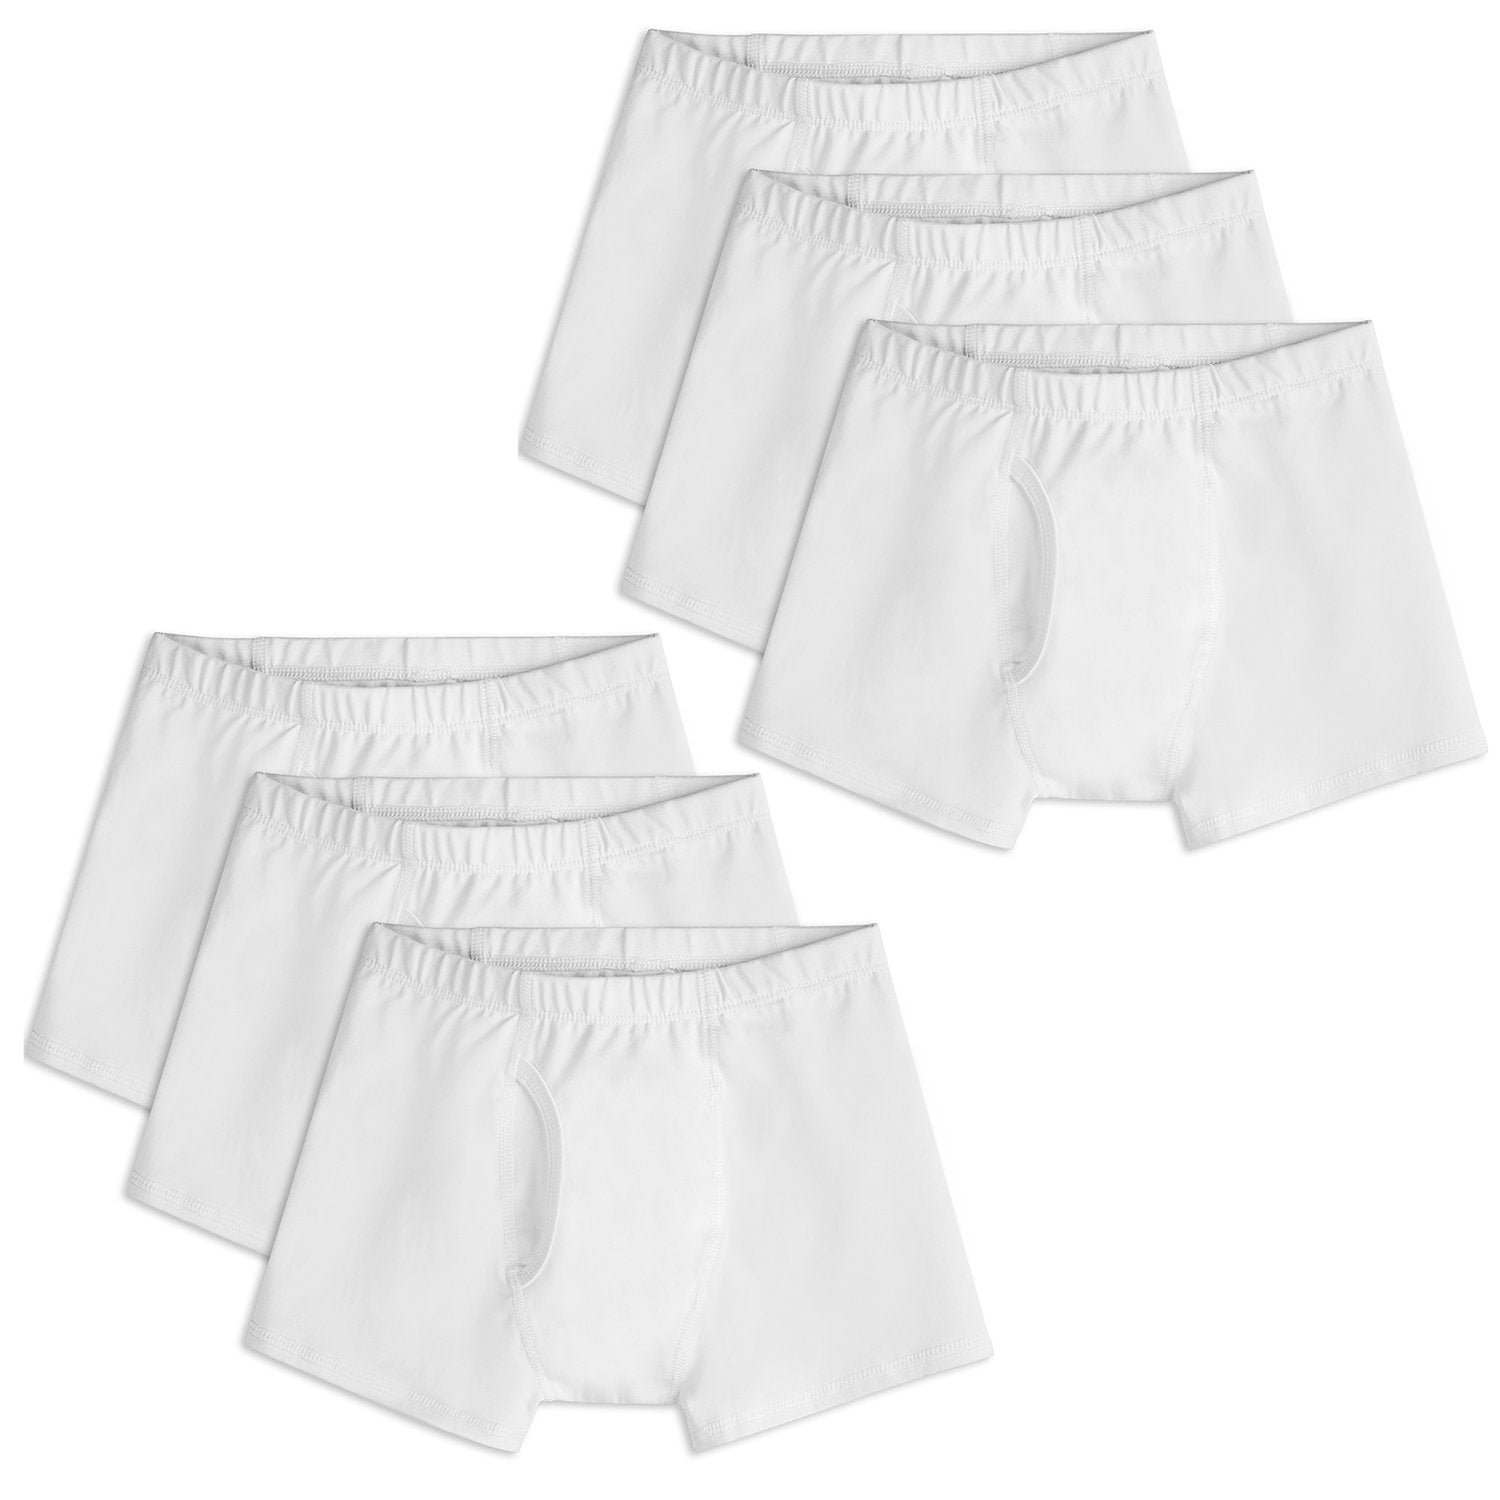 2021 Fashionable Cotton Boxers For Kids Cute Toddler Cotton Full Briefs,  Shorts, And Boxer Shirts For Boys And Girls From Huoyineji, $11.34